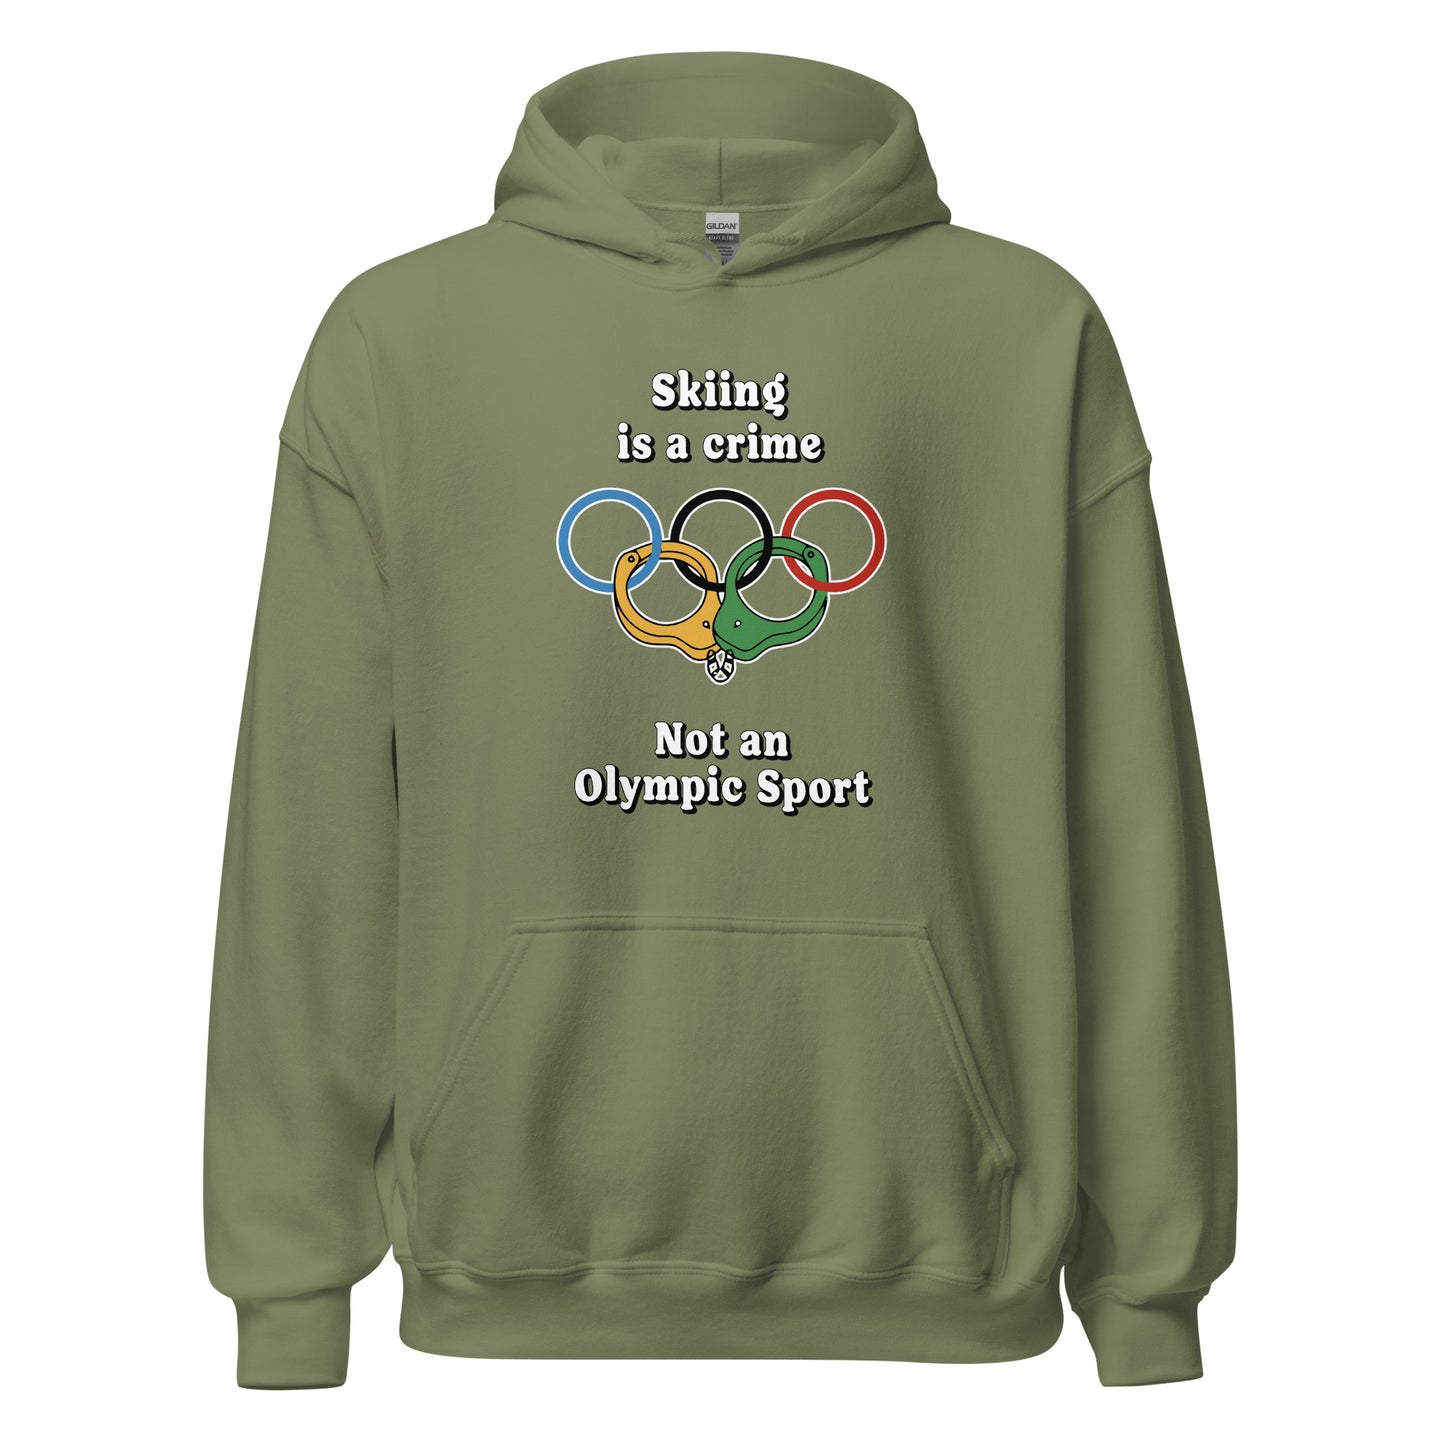 Skiing is a crime not an olympic sport design printed on a hoodie by Whistler Shirts